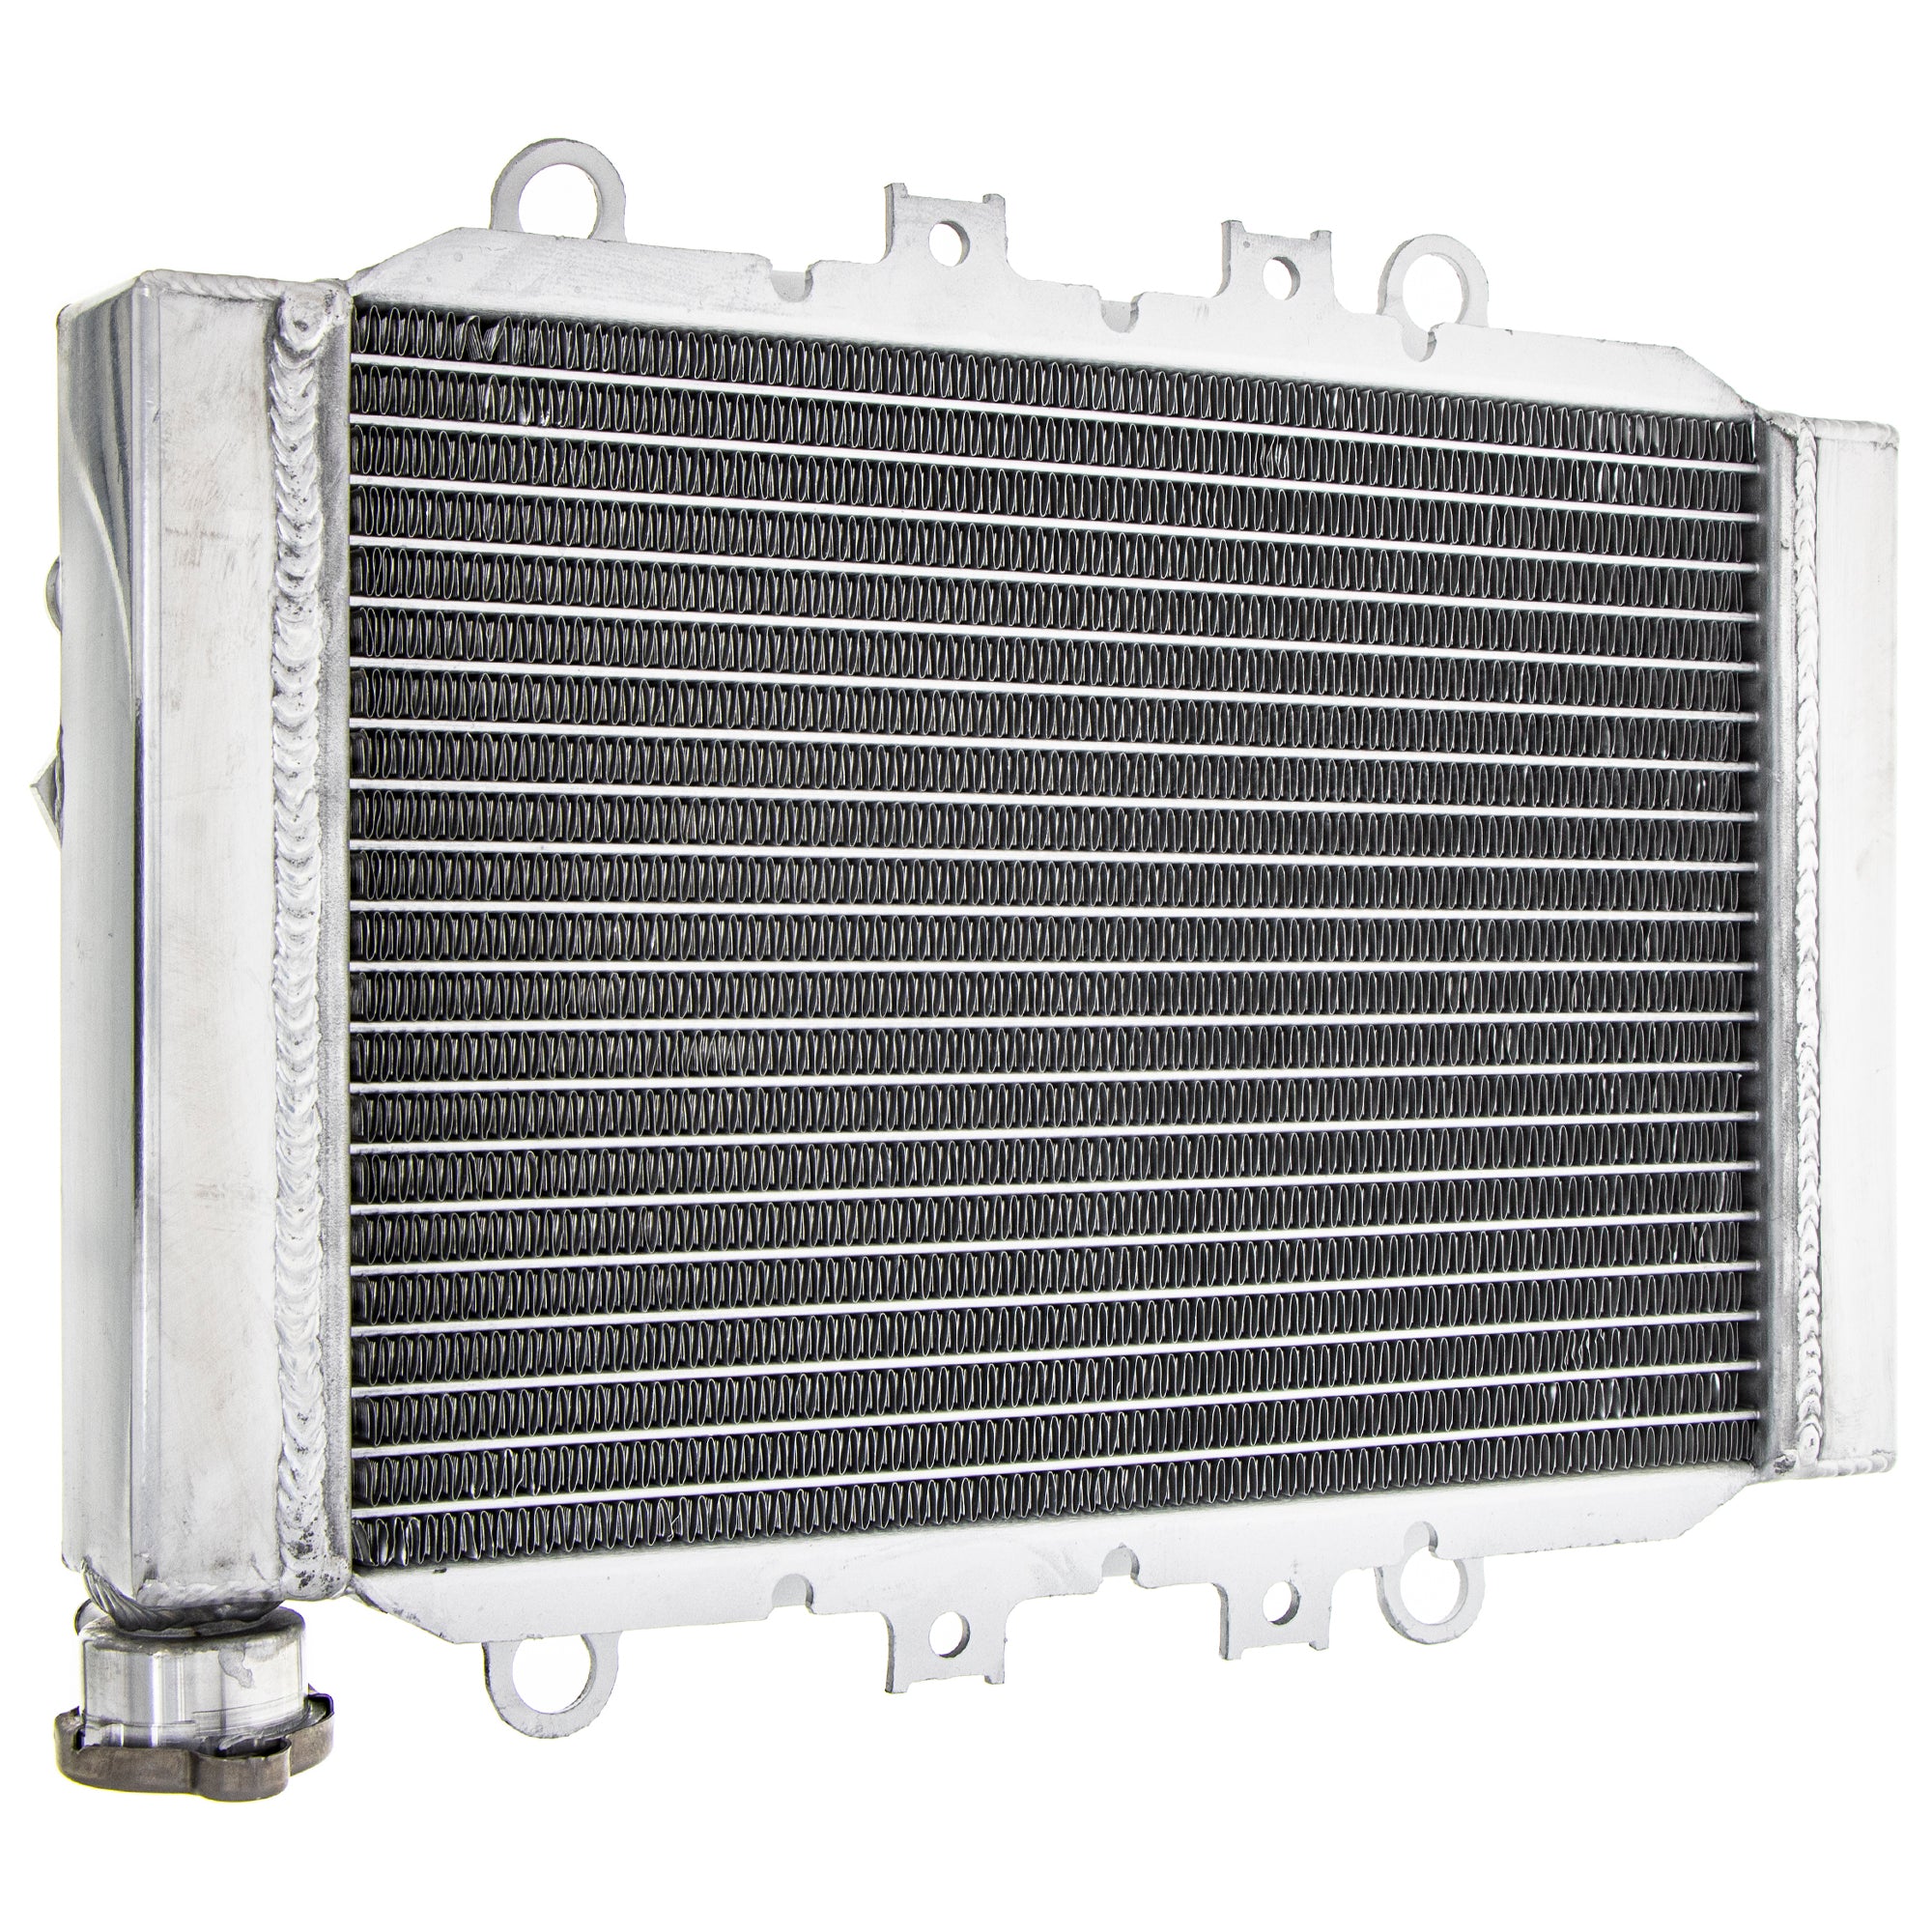 NICHE 519-CRD2259A High Capacity Radiator for zOTHER